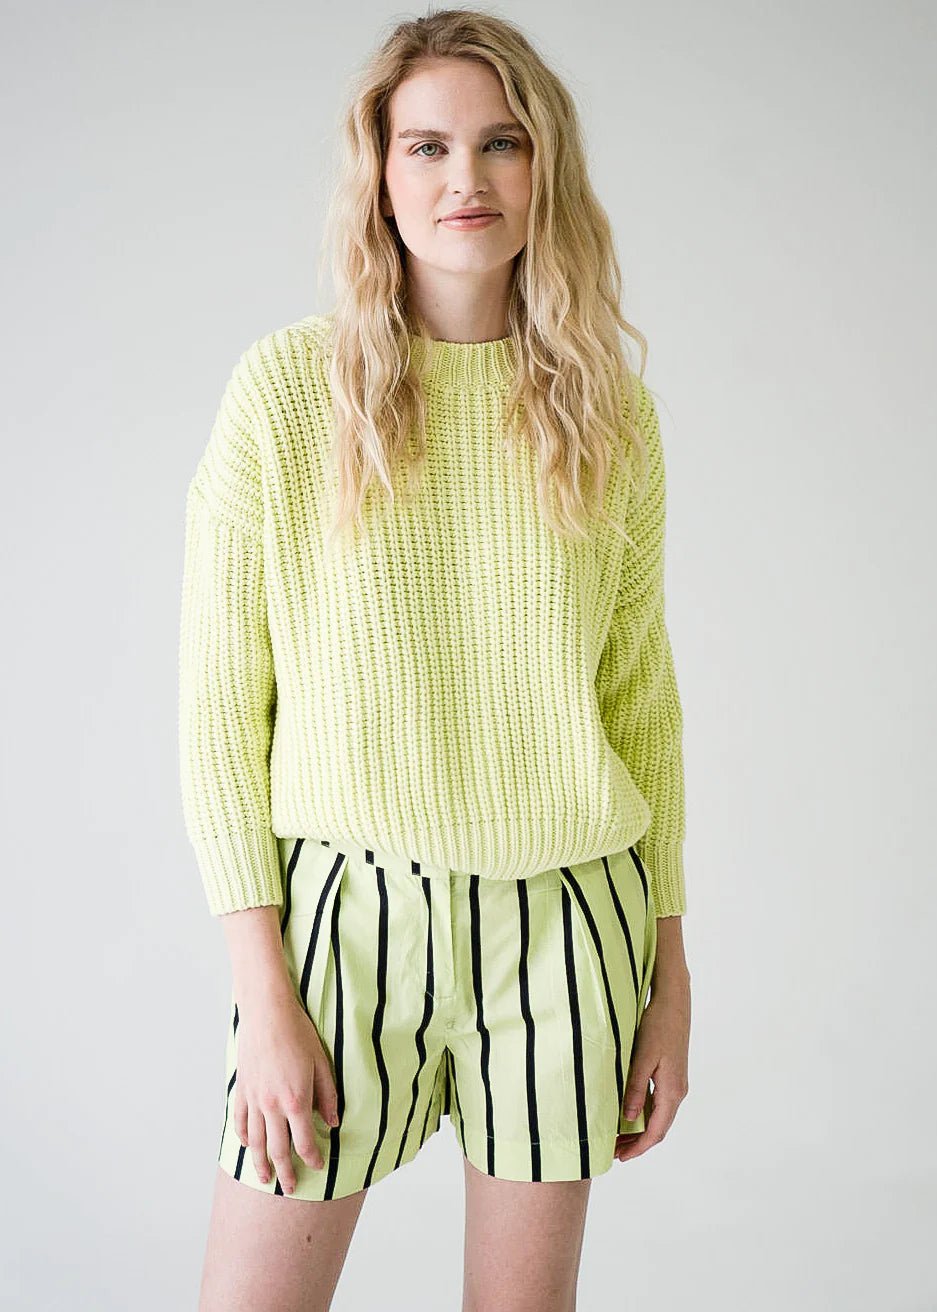 Never A Wallflower Chunky Crew Neck Sweater in Lime - Estilo Boutique